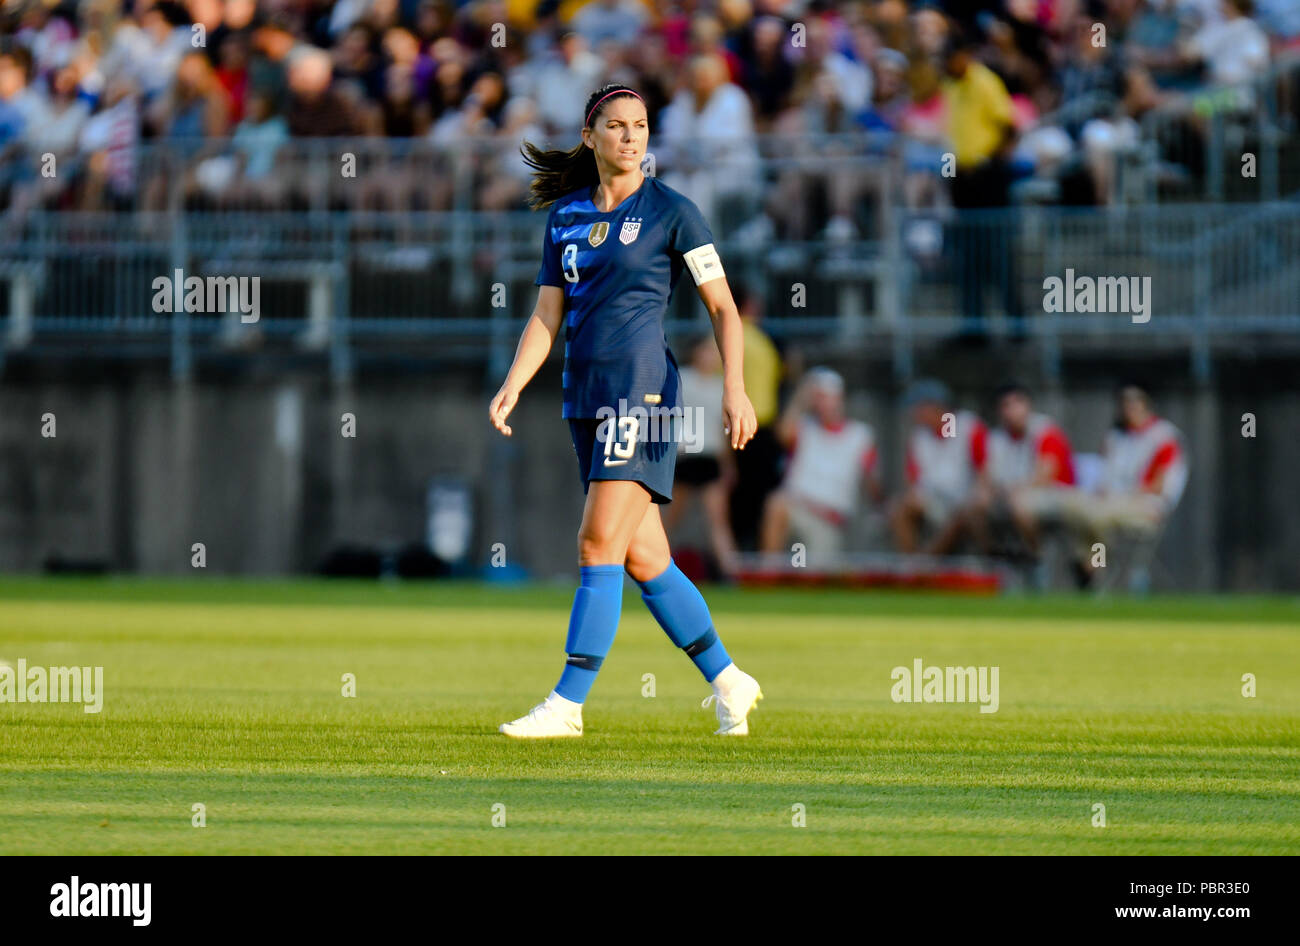 Sunday Aug 29, 2018: Alex Morgan (13) of the USWNT watches the action during a Tournament of Nations game against Australia at Pratt & Whitney Stadium in East Hartford, Connecticut. Gregory Vasil/CSM Stock Photo